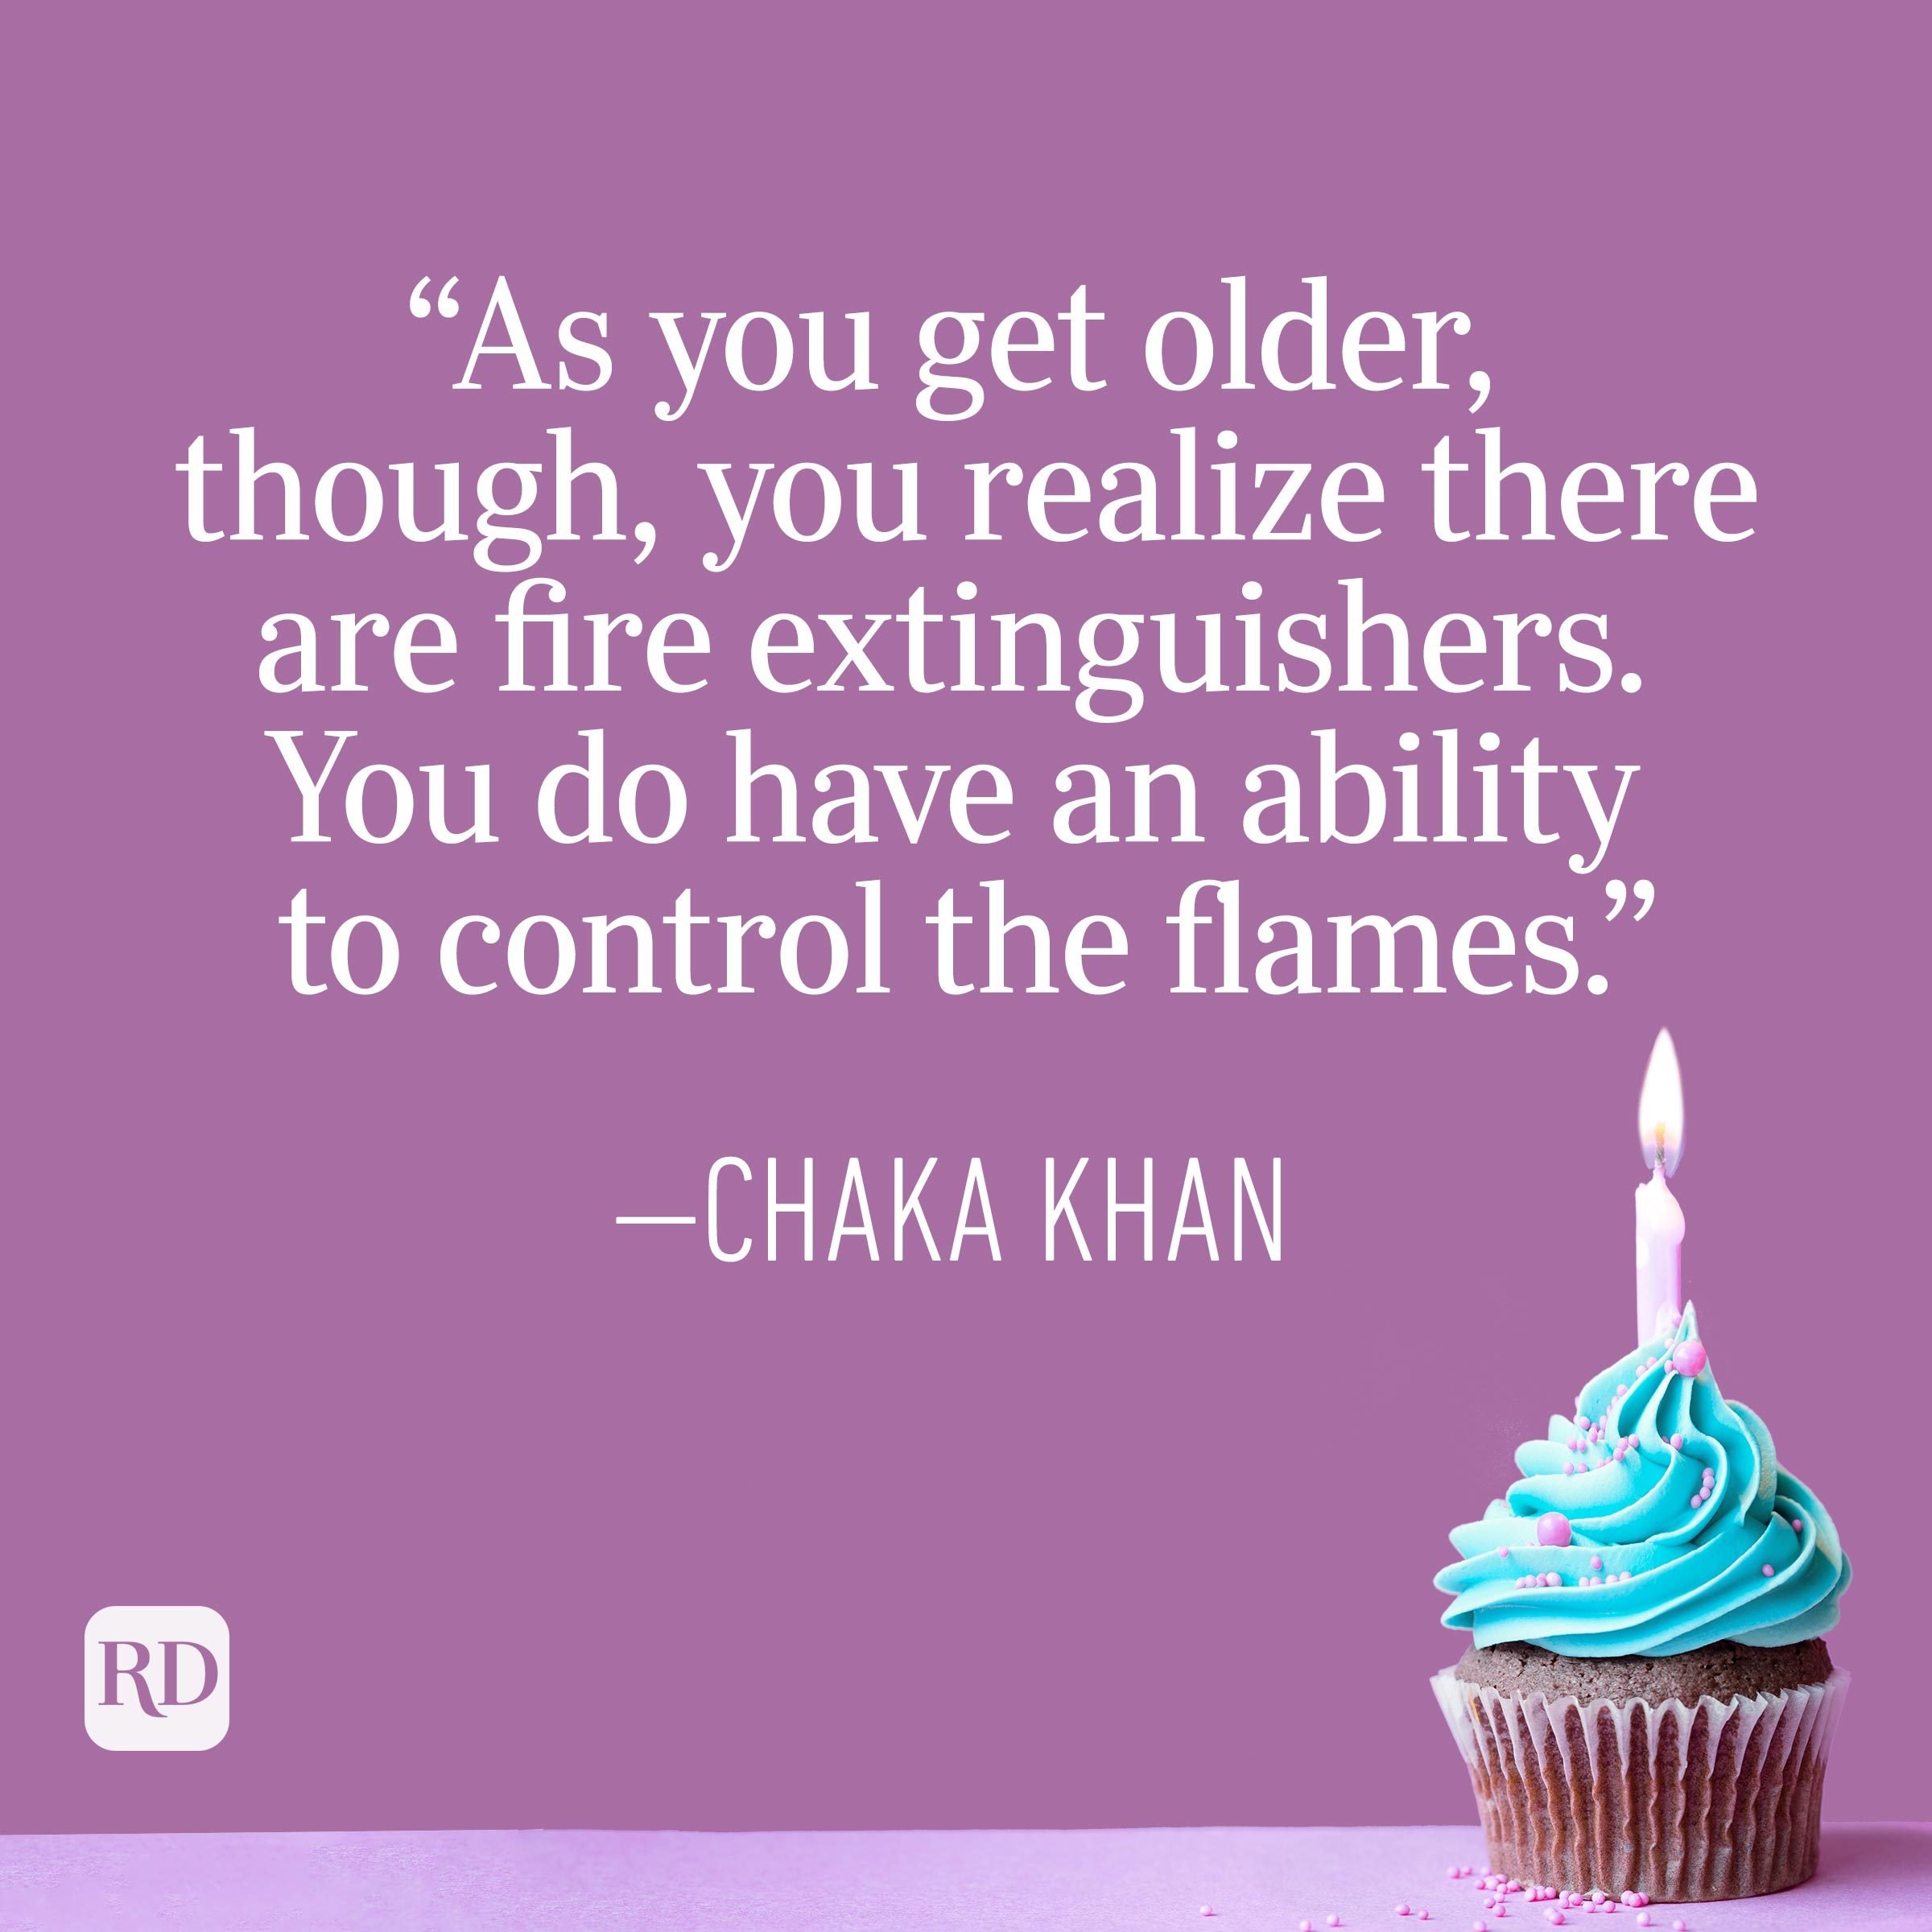 "As you get older, though, you realize there are fire extinguishers. You do have an ability to control the flames." —Chaka Khan